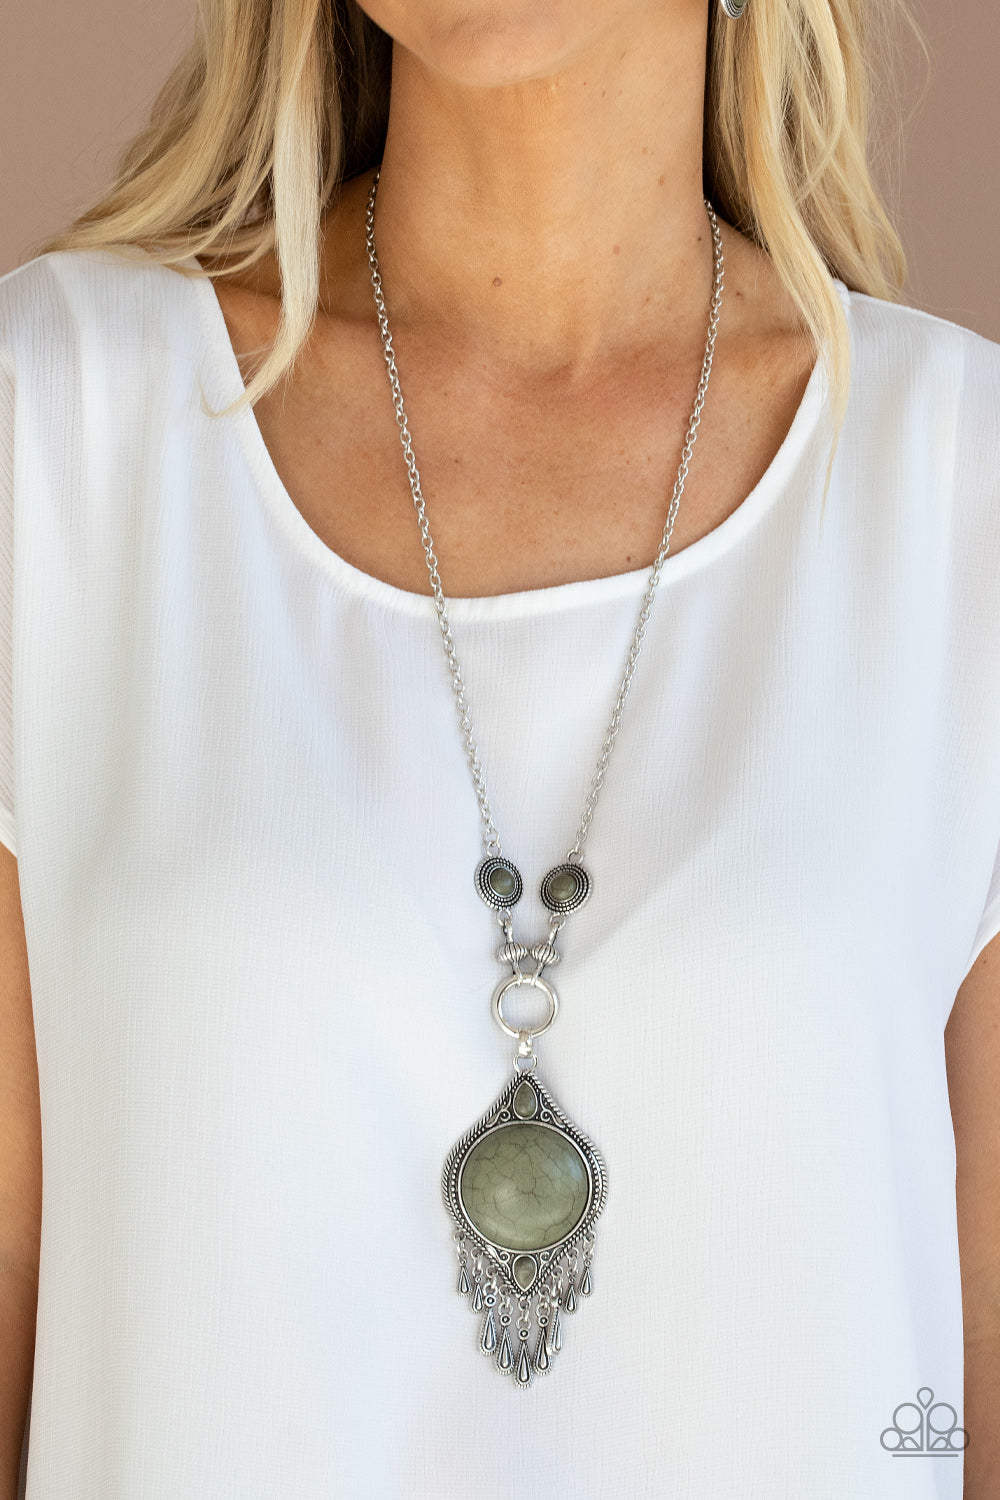 Paparazzi Necklace ~ Majestic Mountaineer - Green Stone Necklace